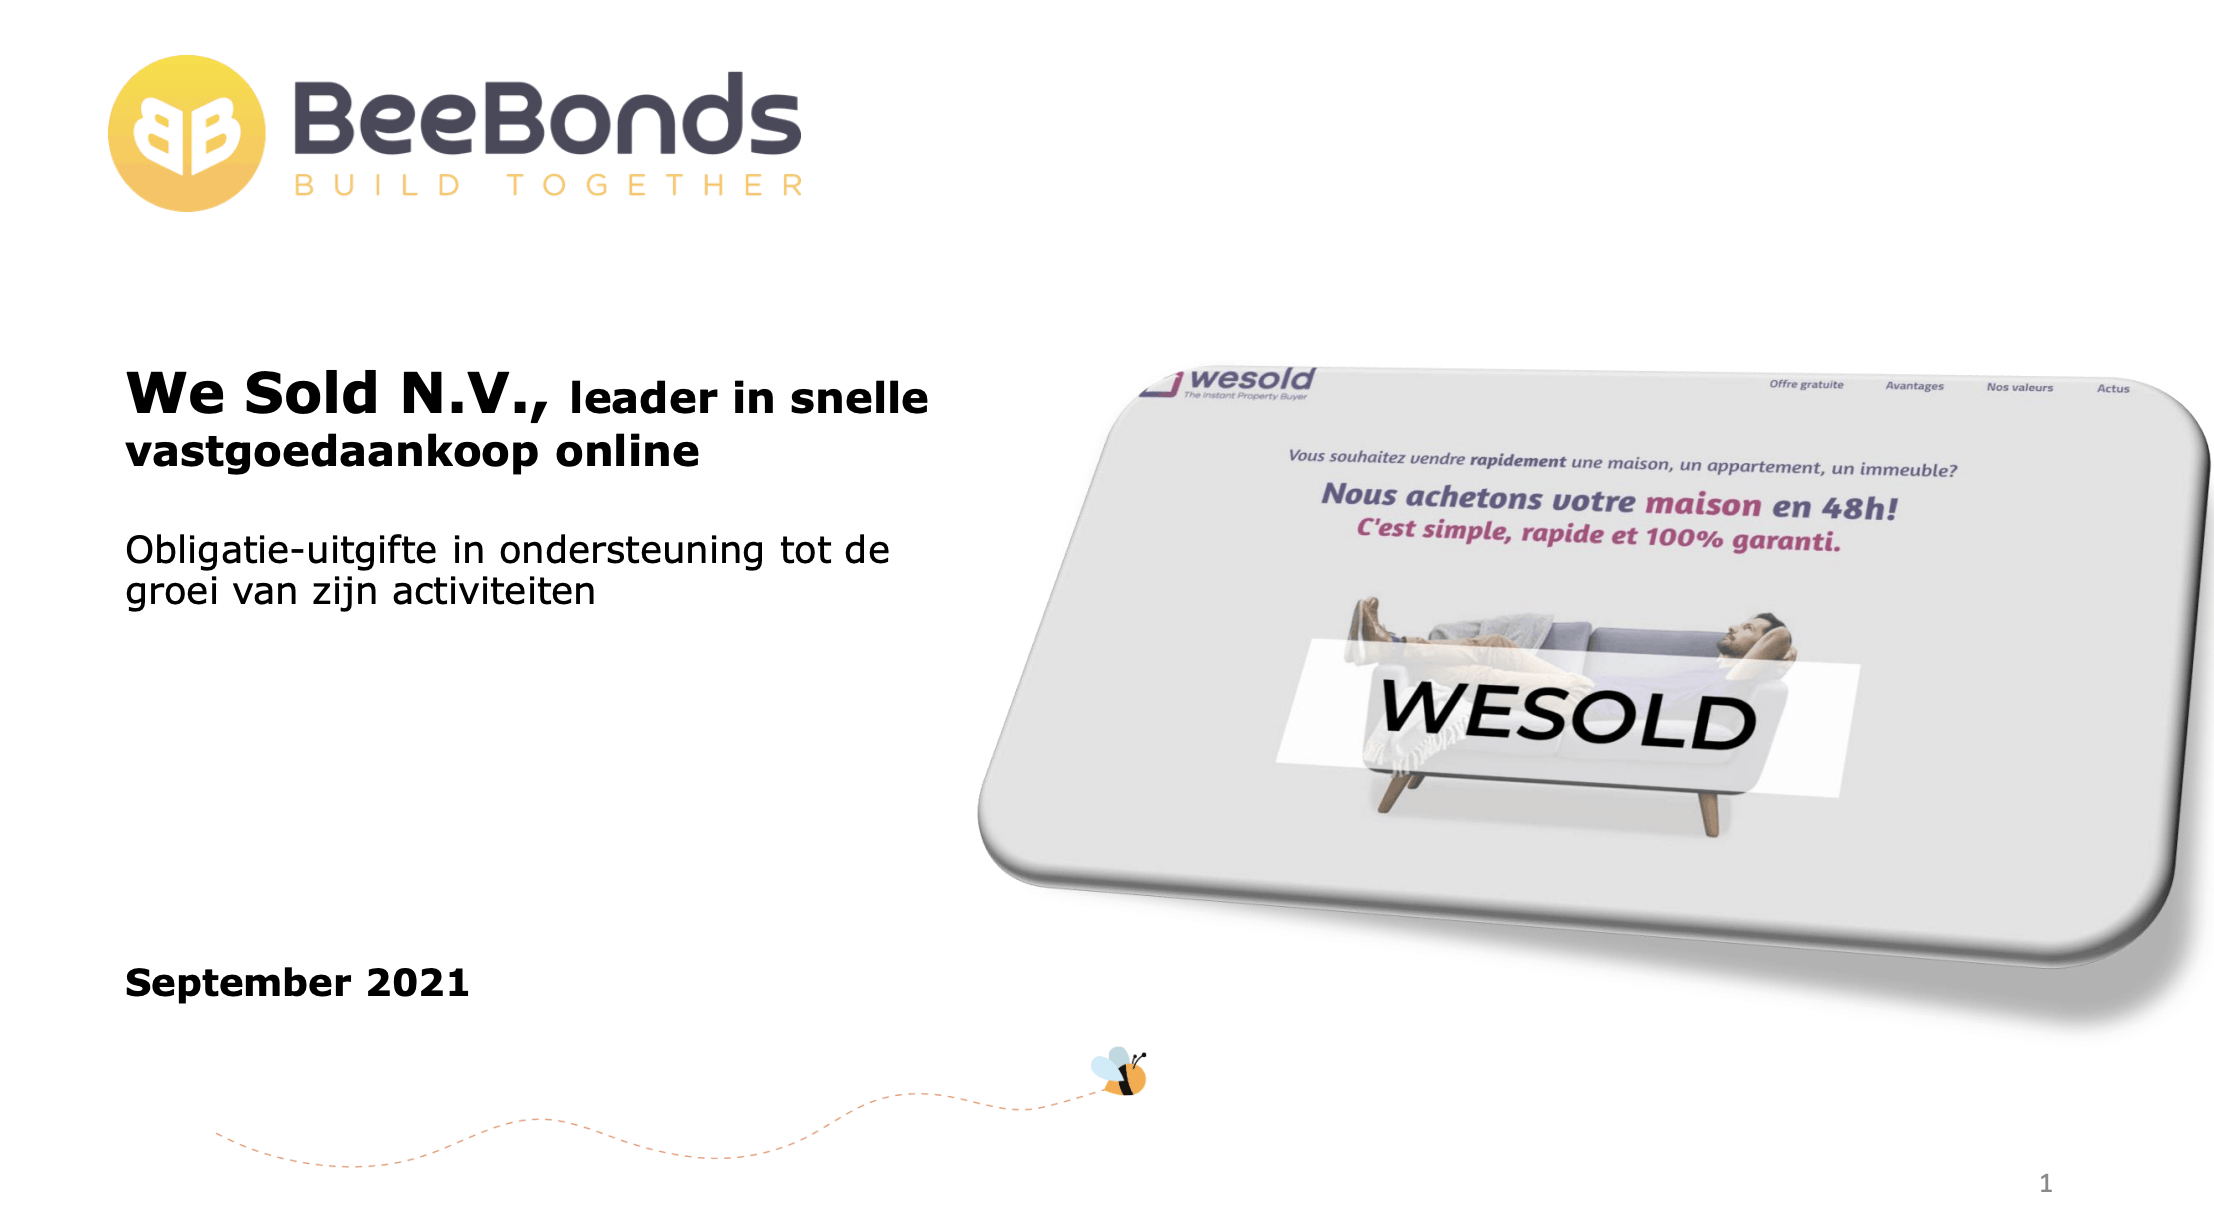 Wesold crowdlending campaign